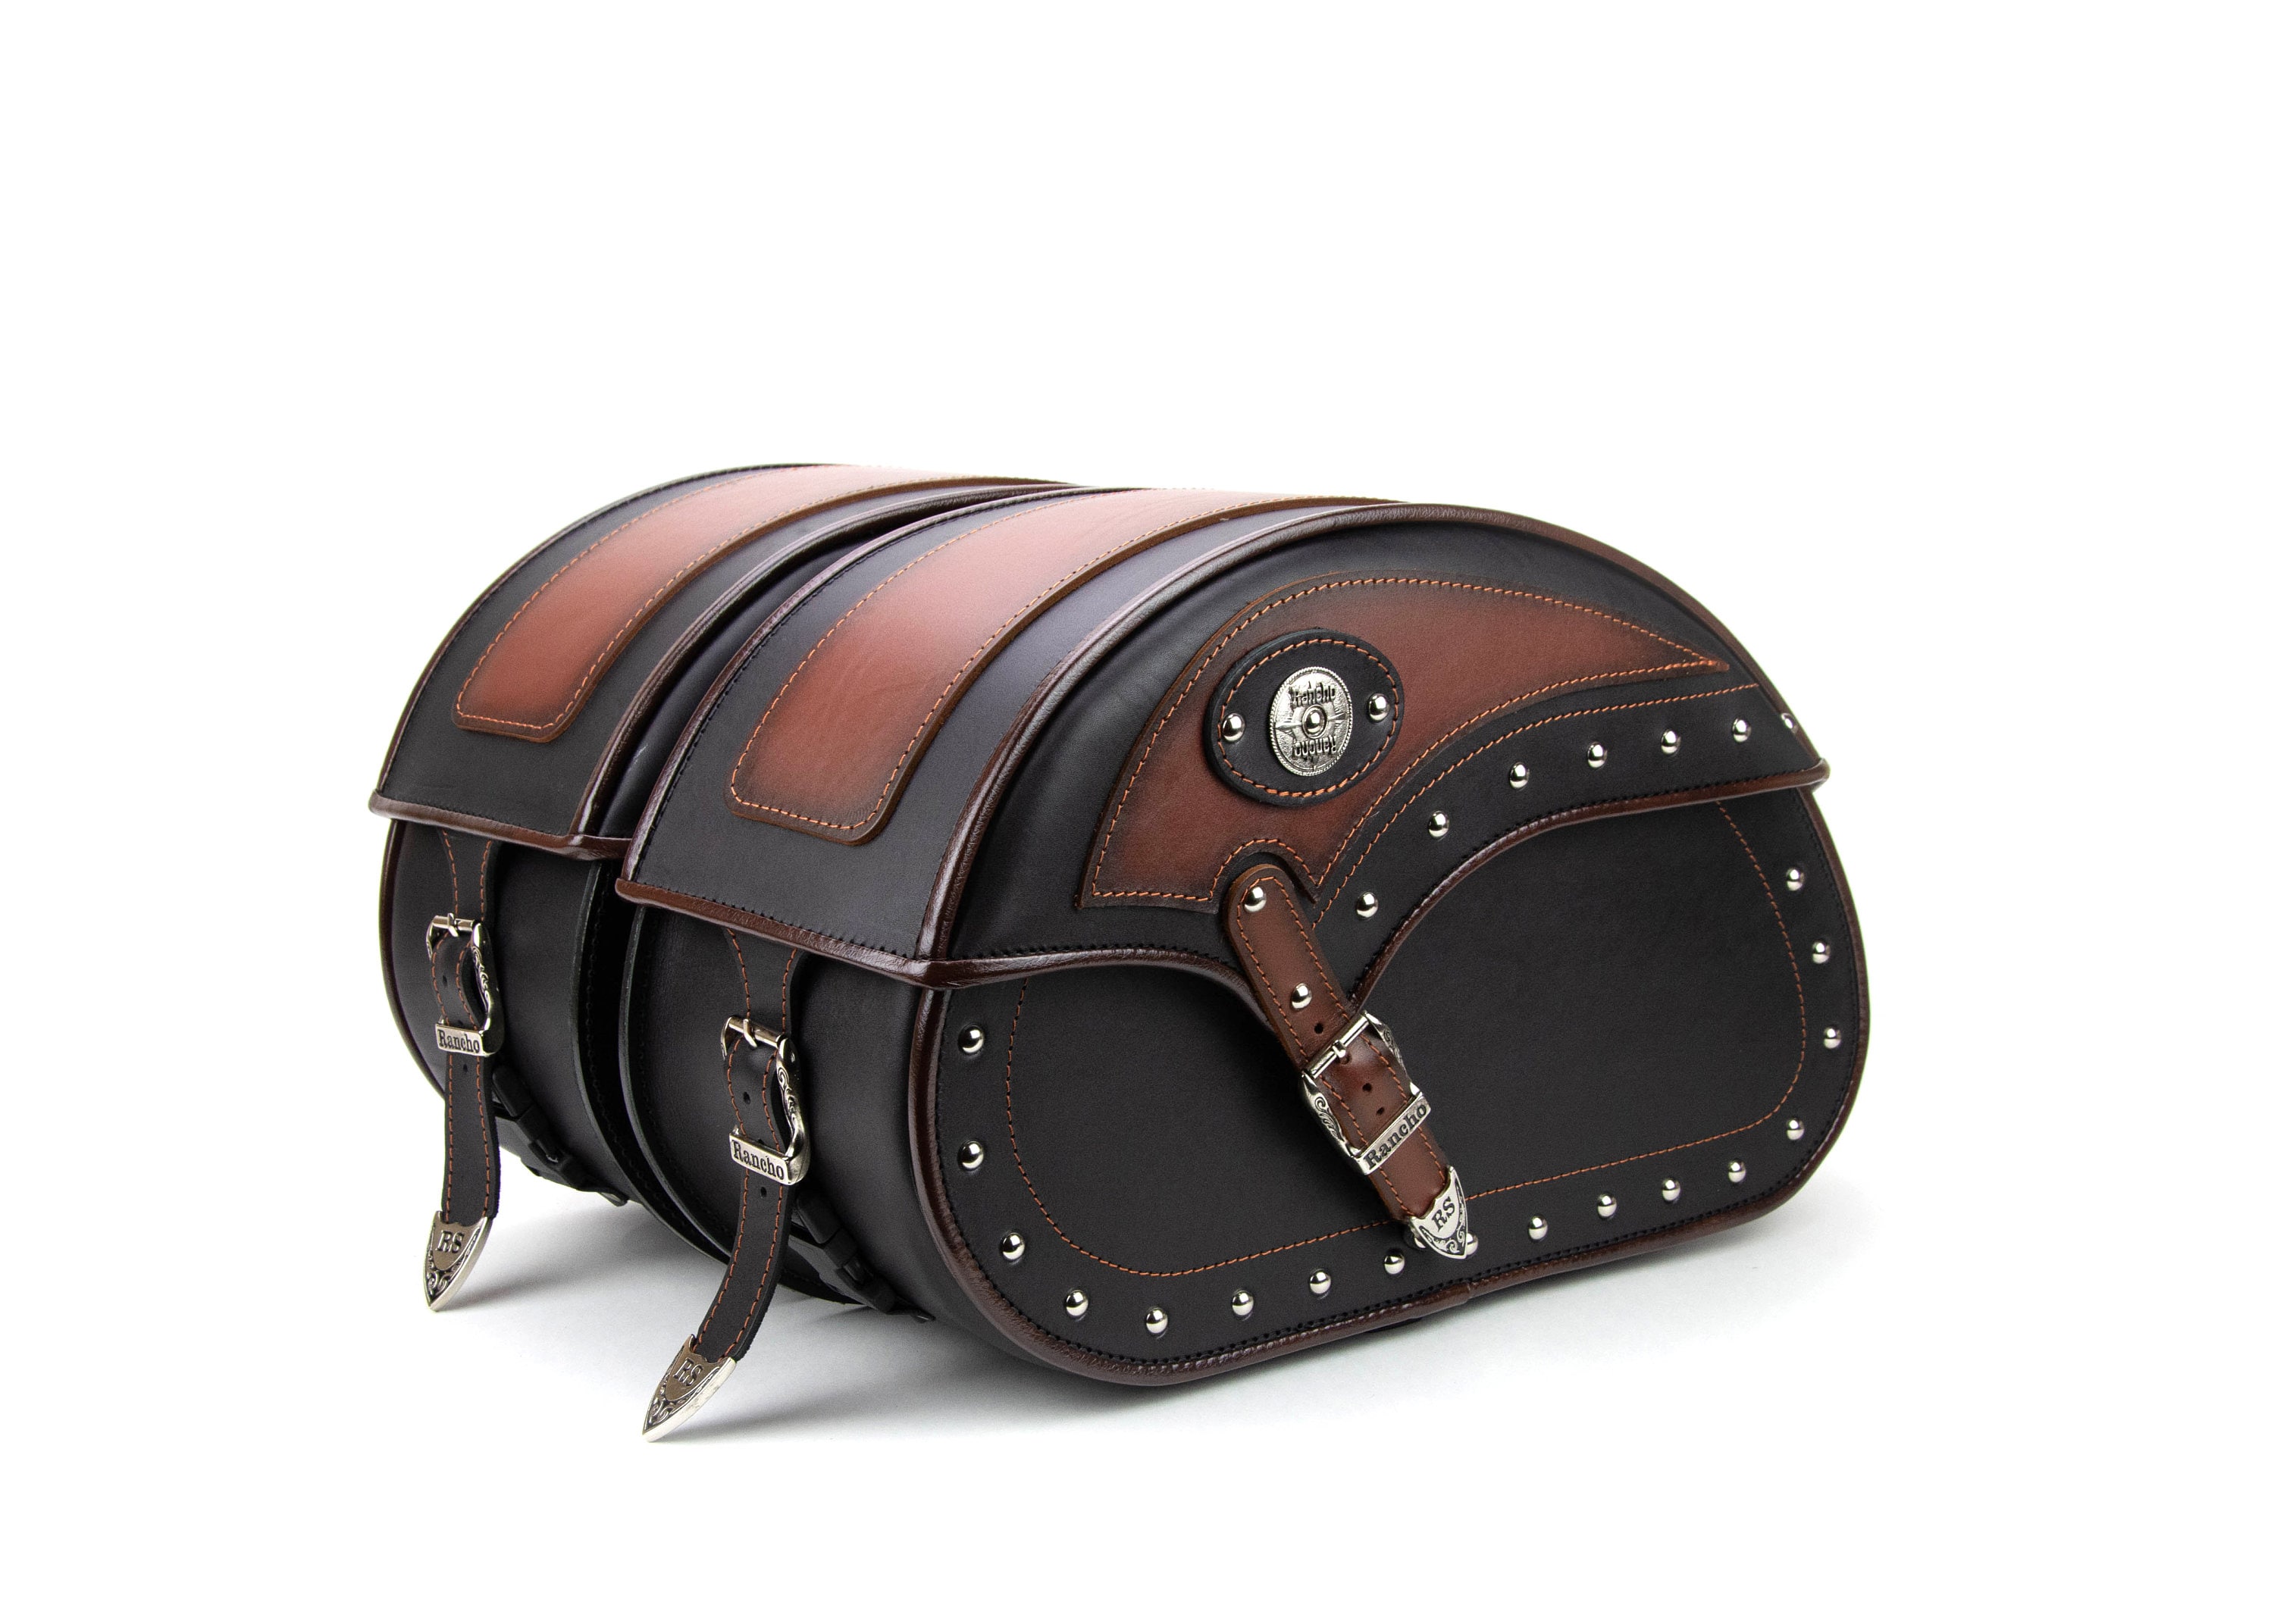 Motorcycle bags and accessories any wares from a by RanchoStyle